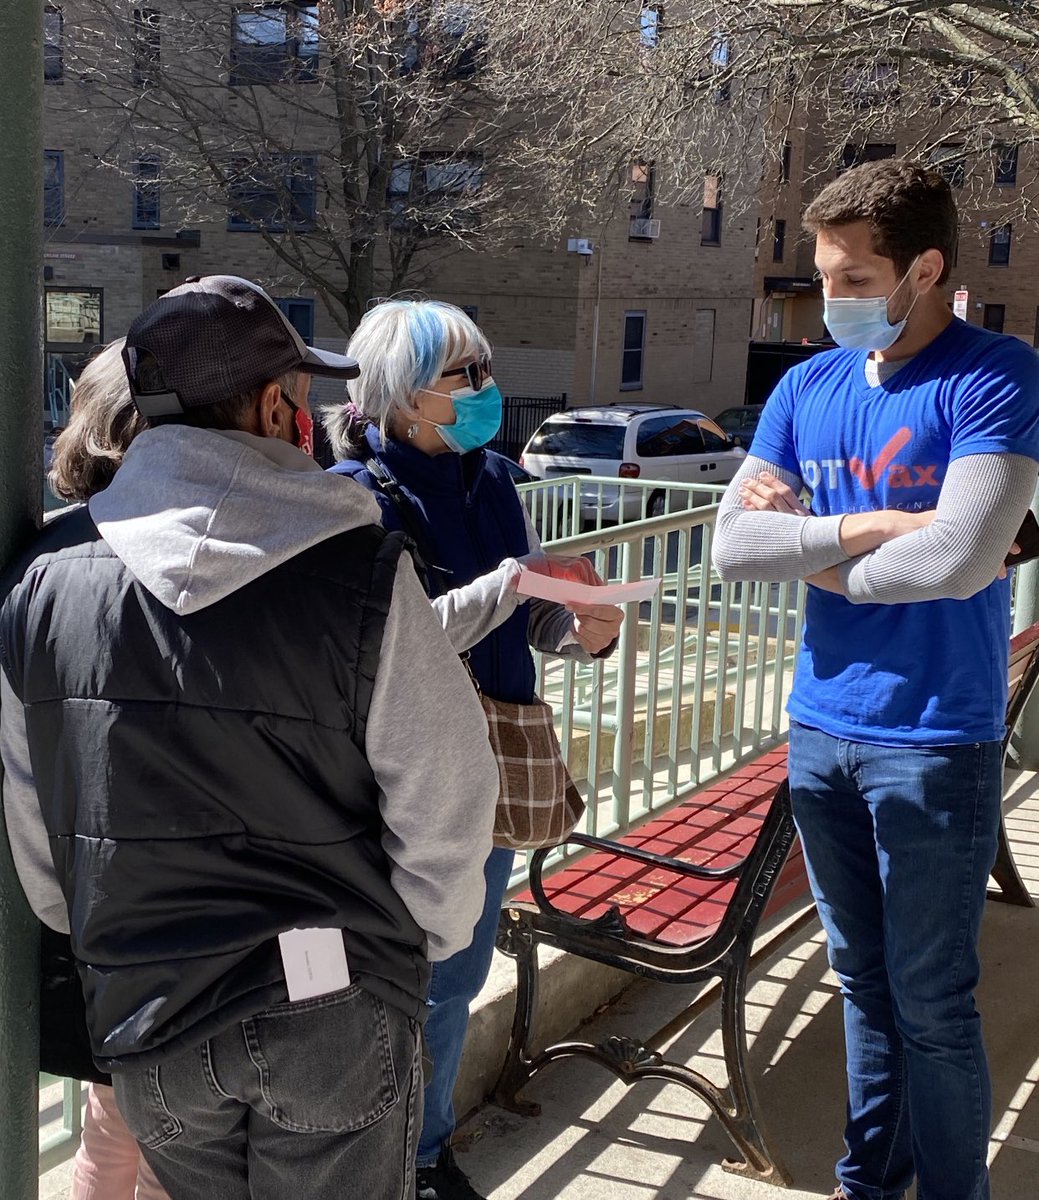 Our healthcare provider volunteers and community organizers know that the way you address equity gaps in vaccination rates is by building trust. It’s by showing up in communities. It’s by taking the time to let folks feel heard and bringing the vaccine to them. #ThisIsOurShot